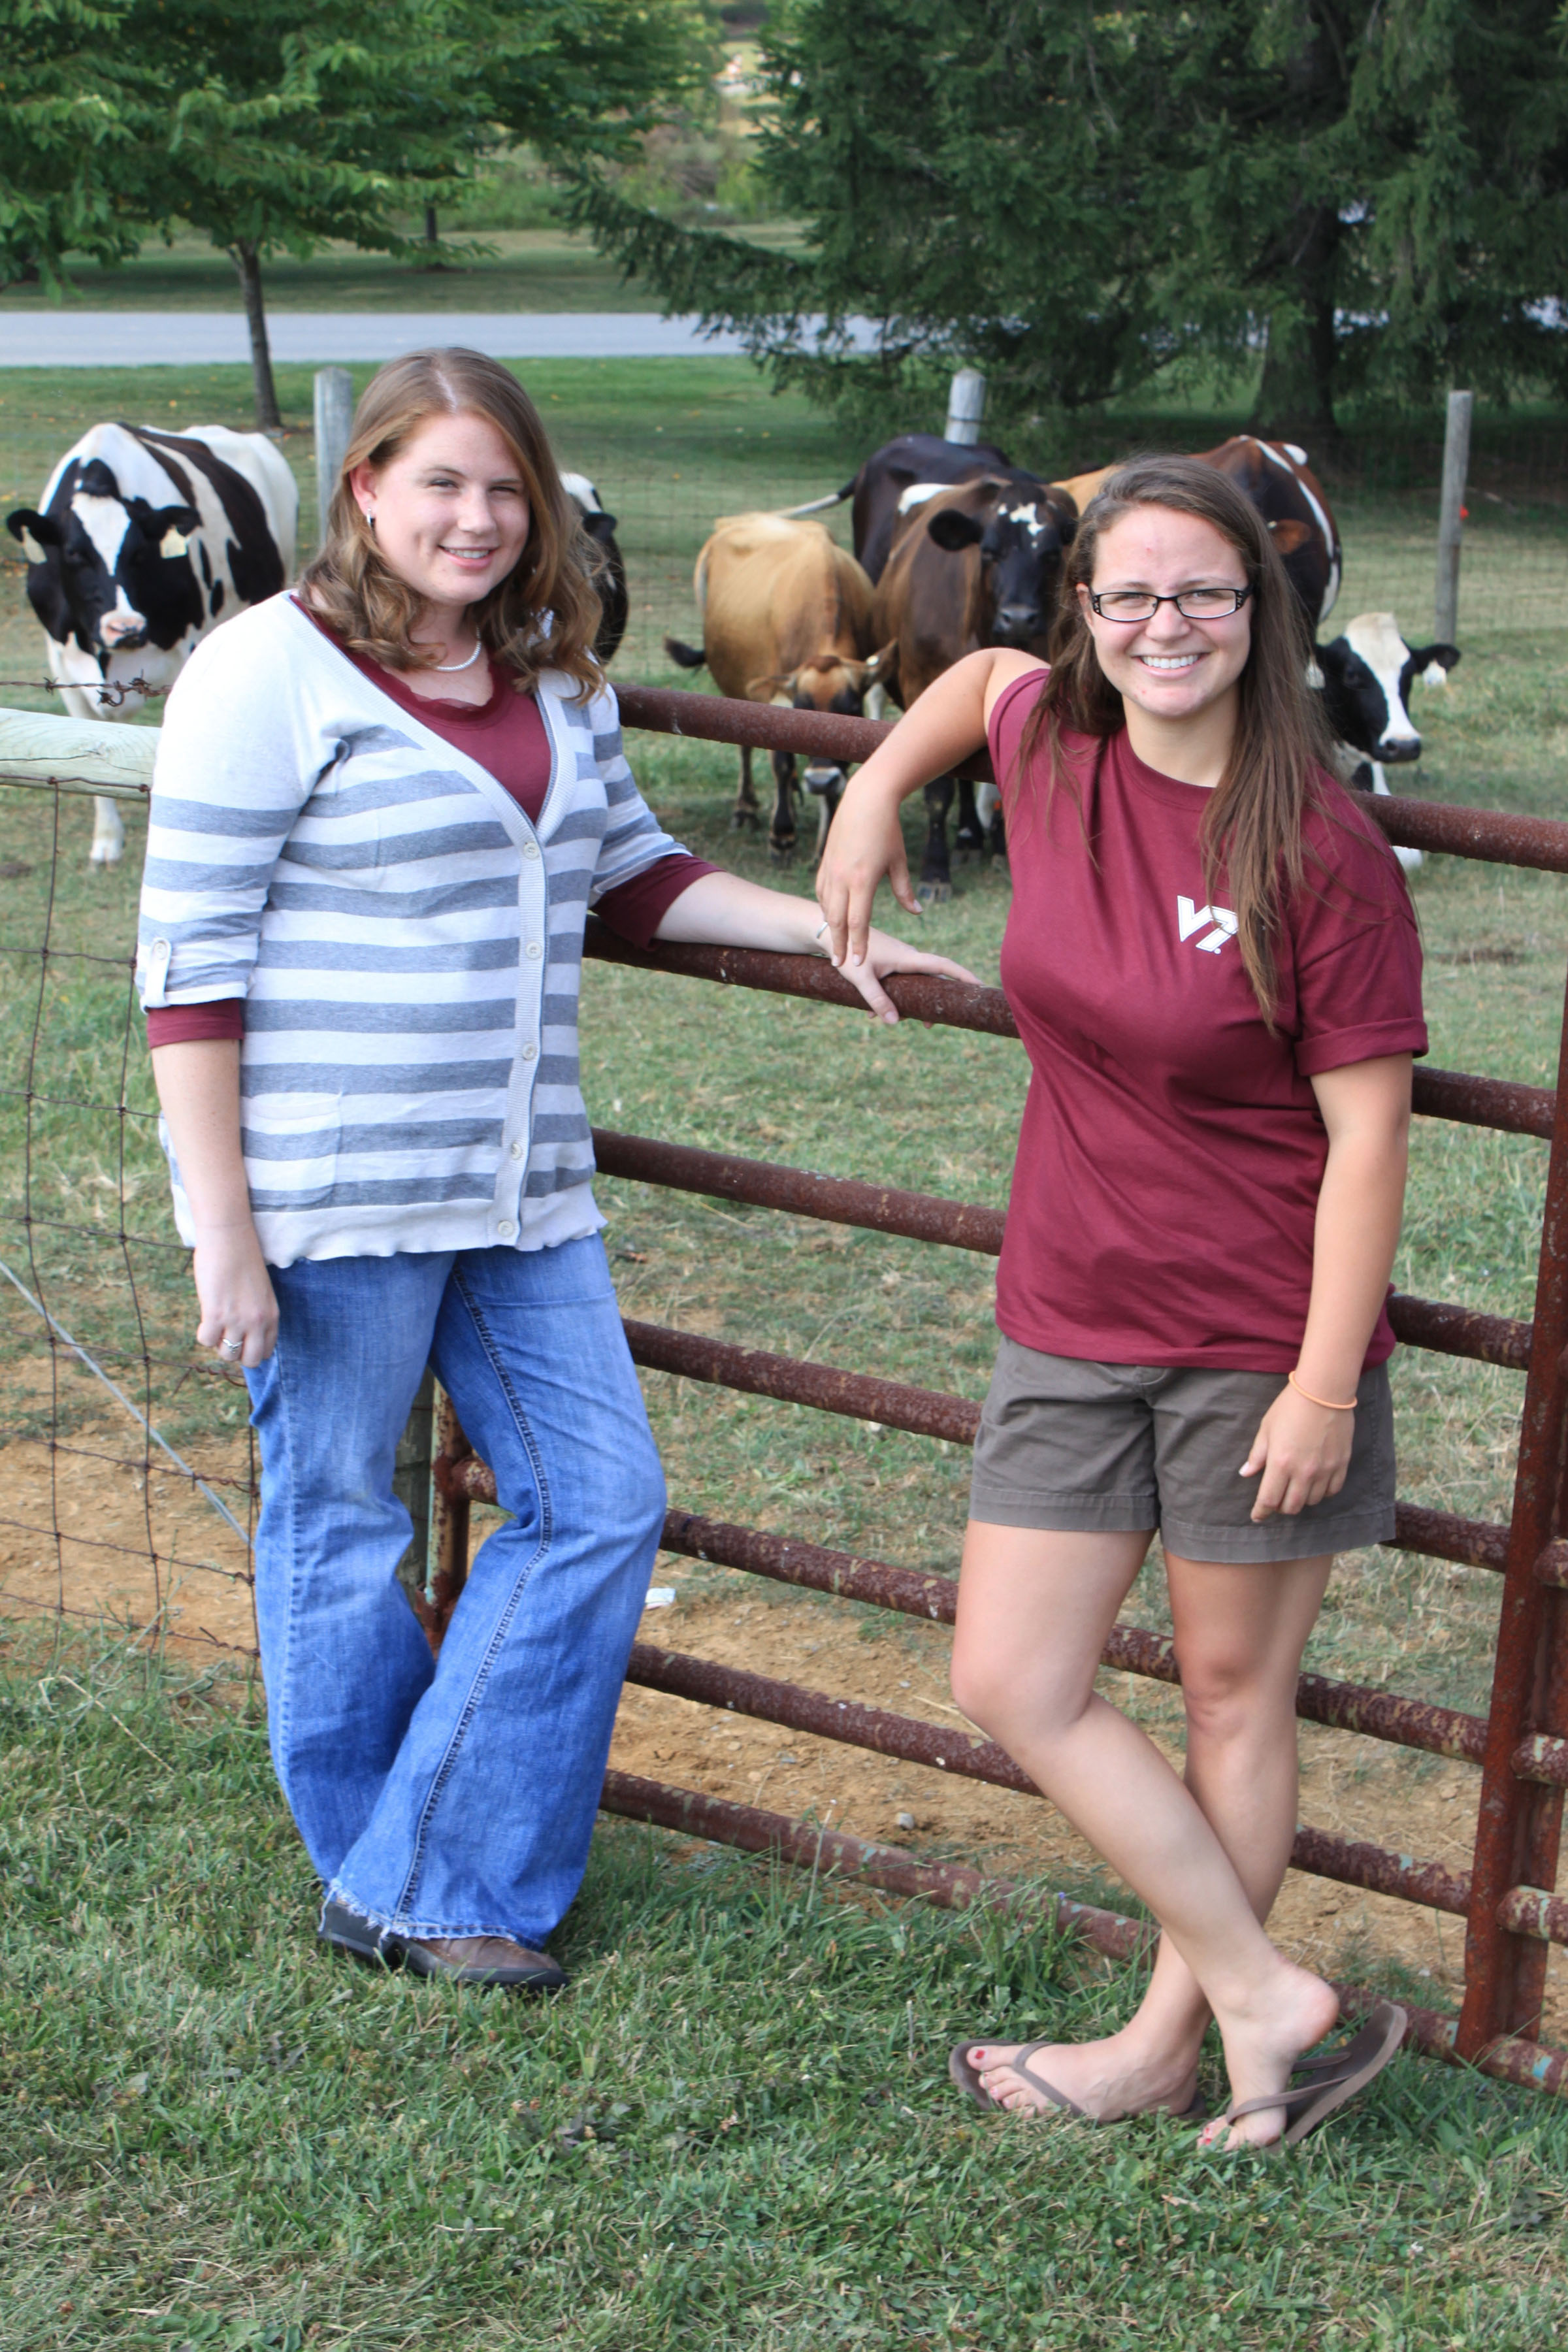 Photograph of Roy E. and Thelma R. Groseclose Scholarship recipients Emi Scott and Bailey West.